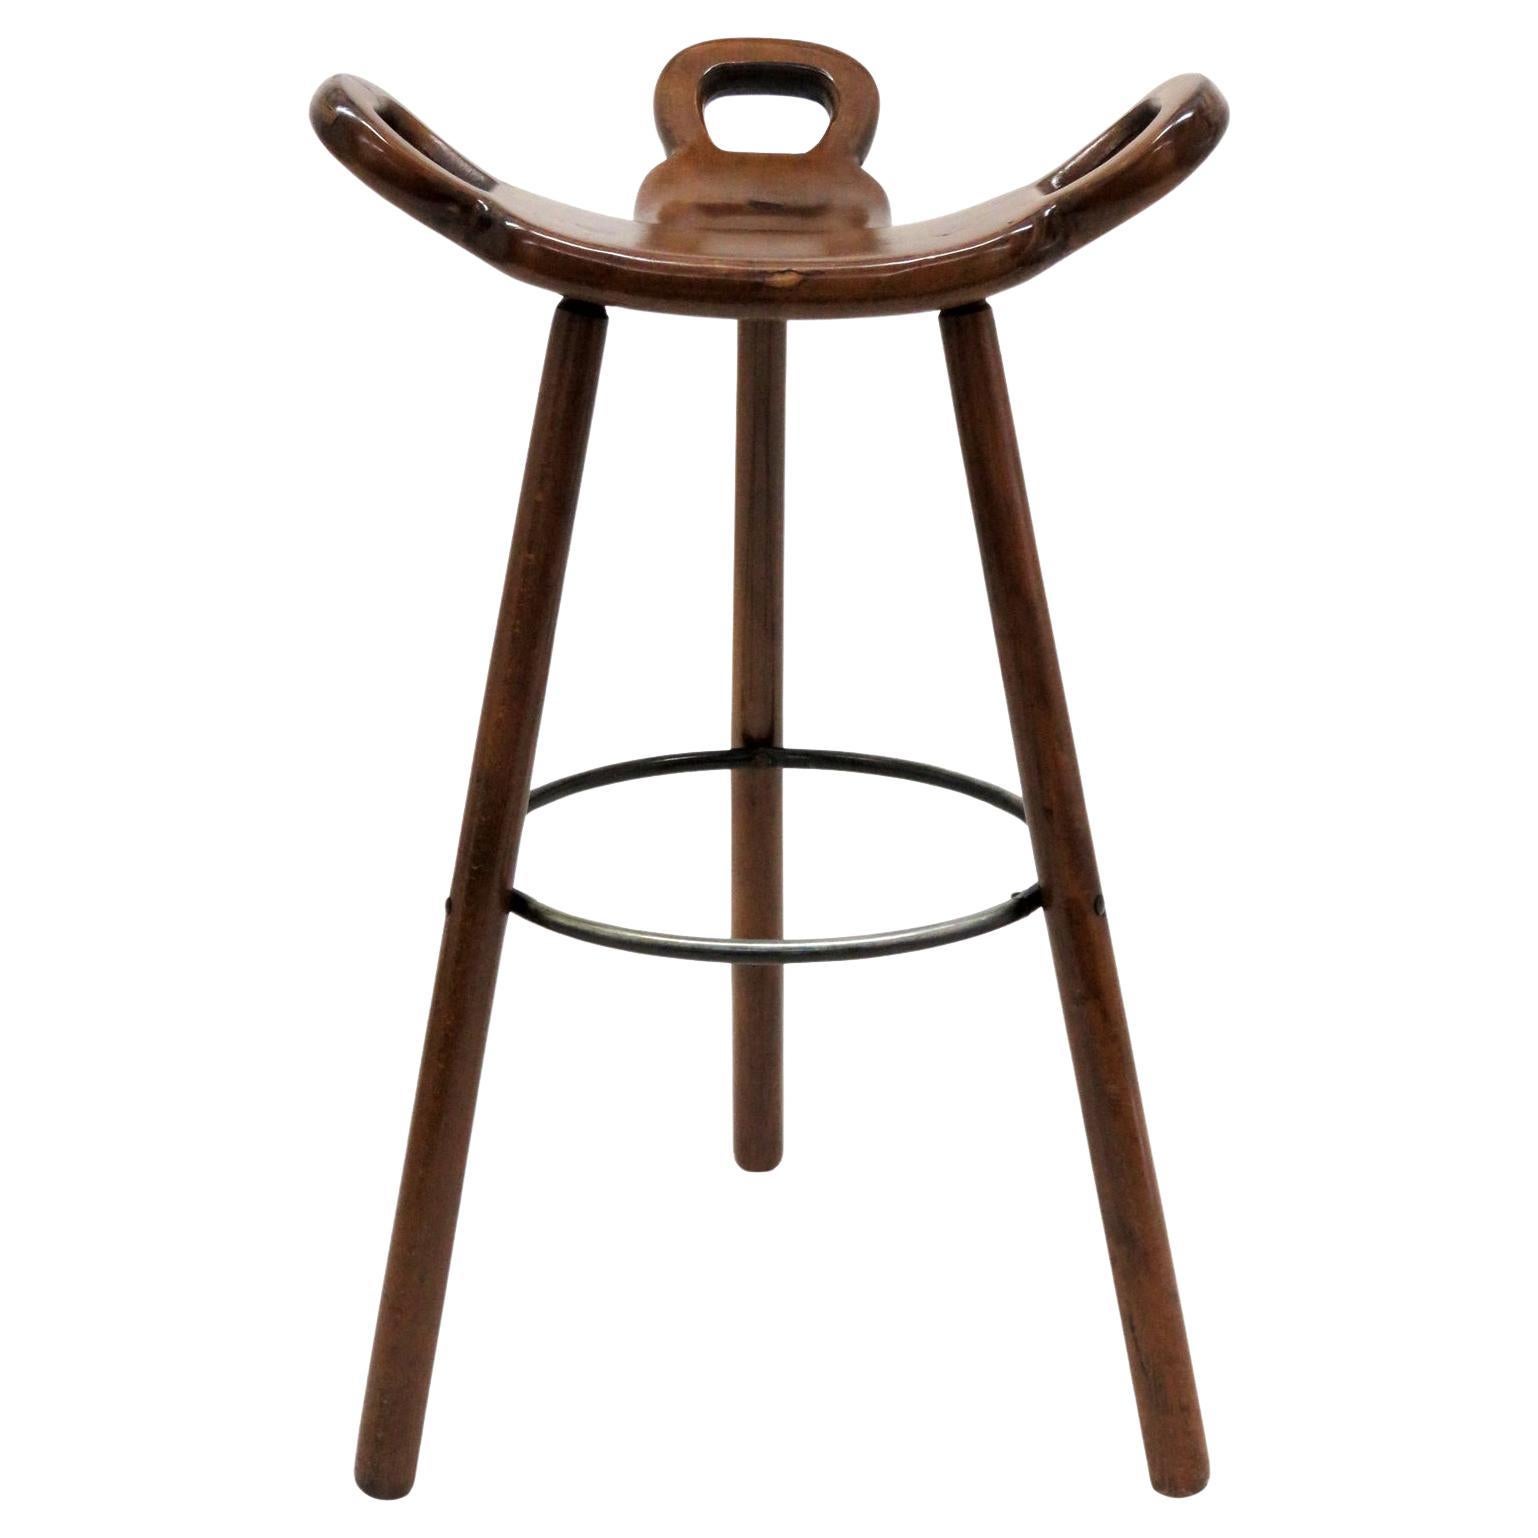 Brutalist "Marbella" Bar Stool by Confonorm, 1970 For Sale